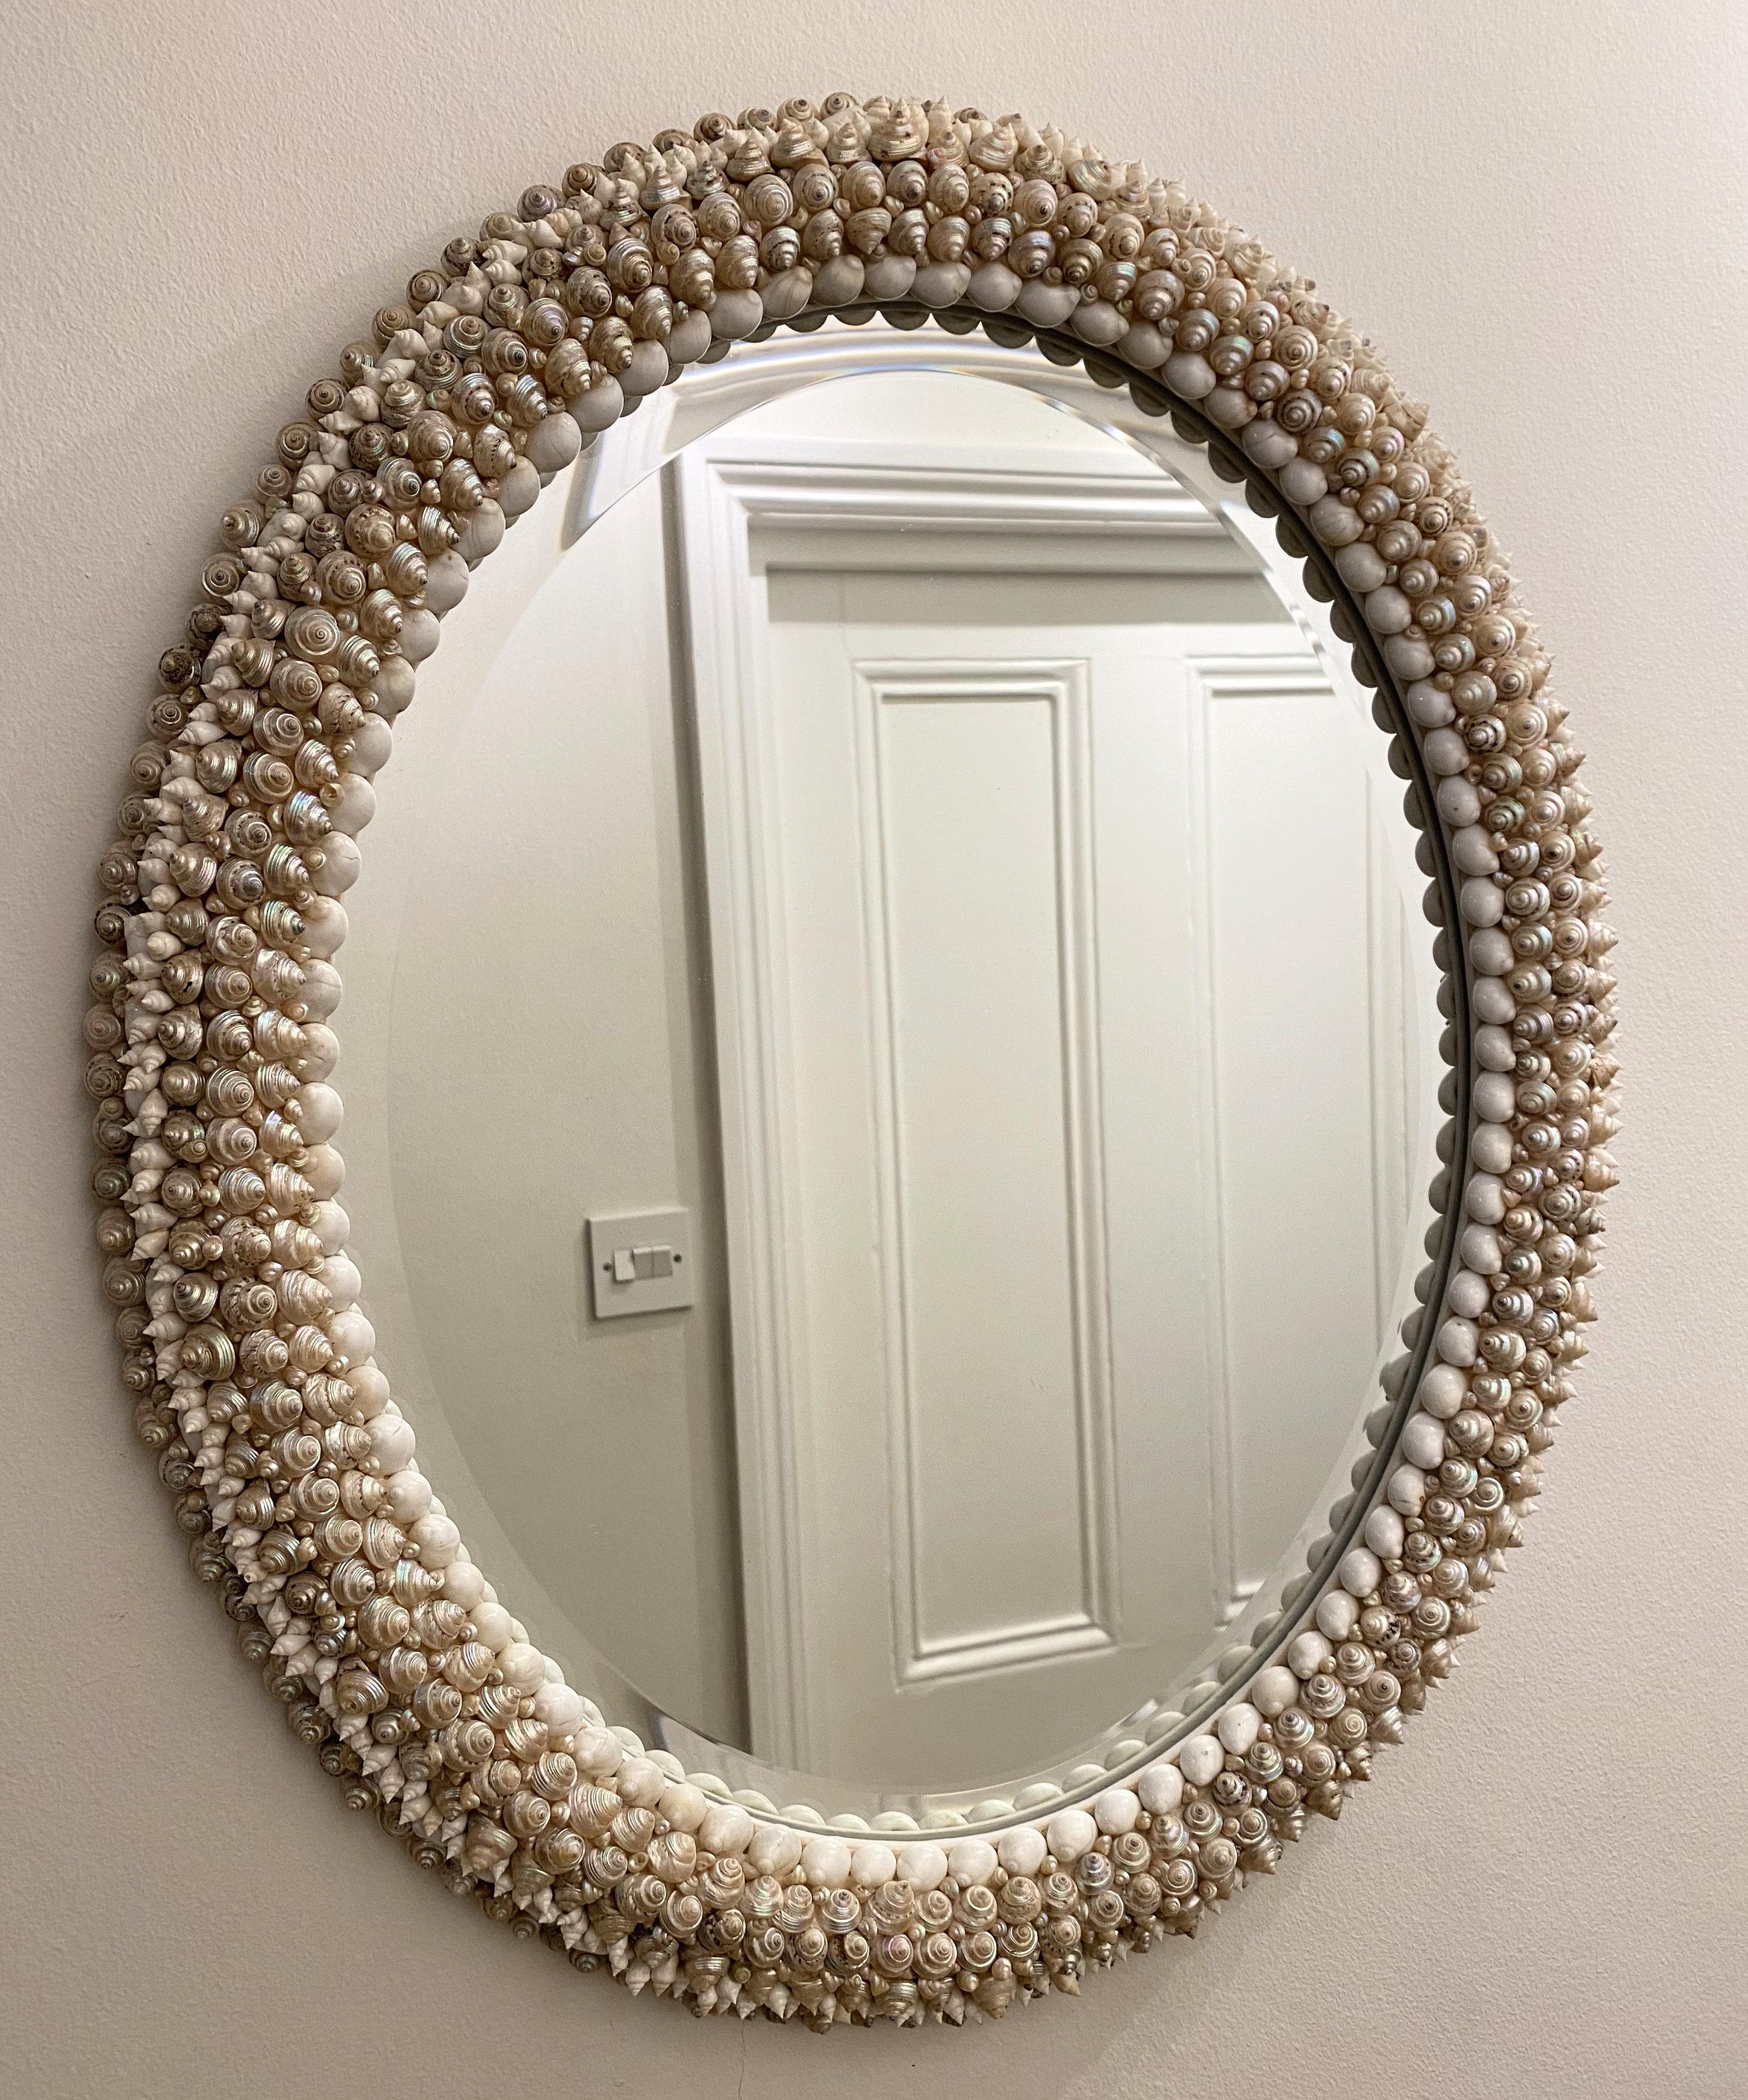 This beautiful and elegantly styled oval shell wall mirror was designed to simulate a multiple strand pearl necklace around glass with iridescent coiled shells surrounding the entire frame. The piece measures: 24 in, 61 cm high, 20 in, 50.8 cm wide